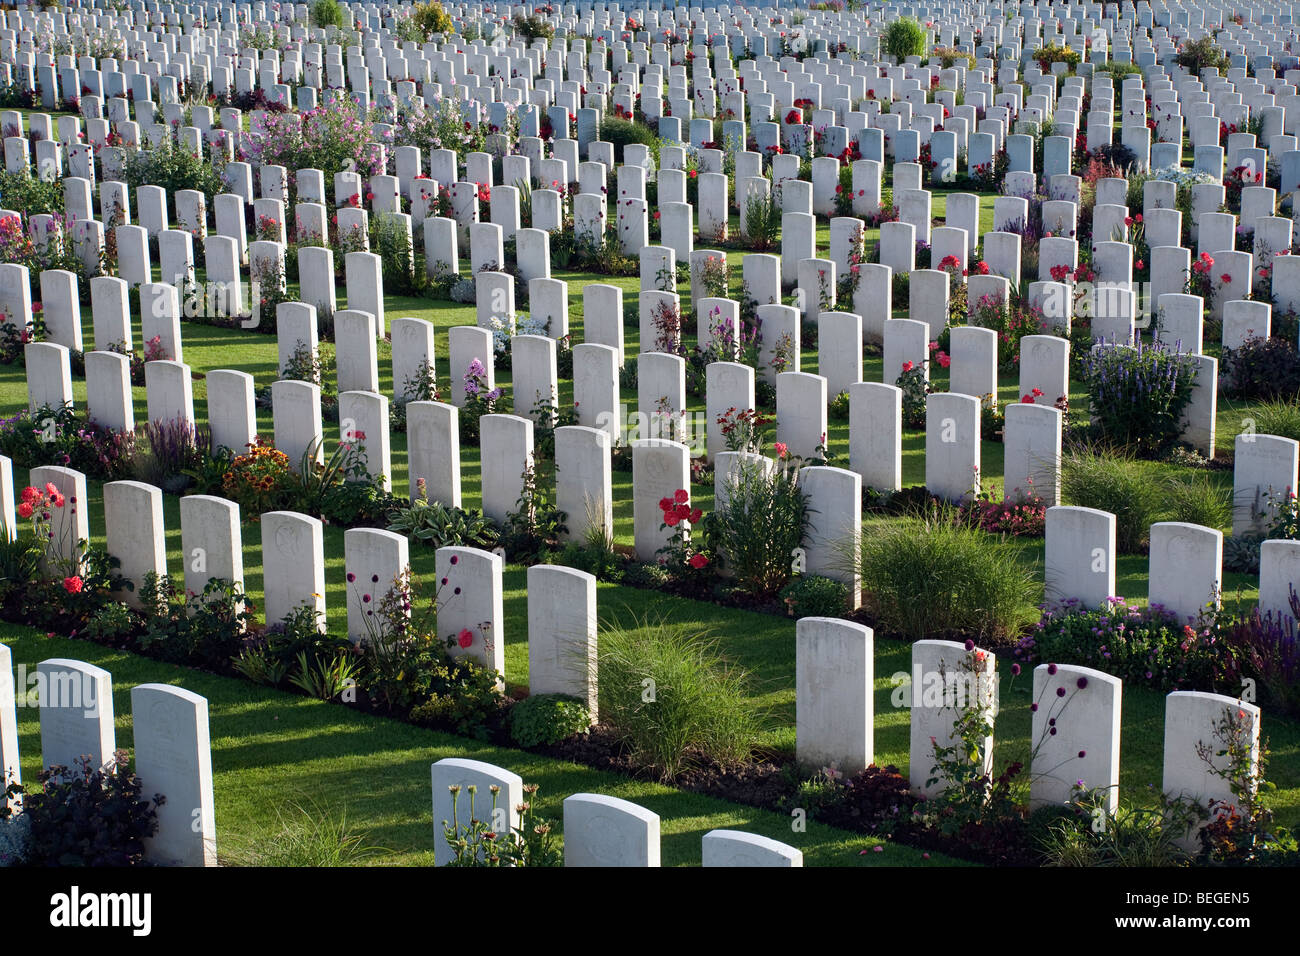 View over Tyne Cot Military Cemetery. First World War  British cemetery with 11,856 white tombstones. Stock Photo